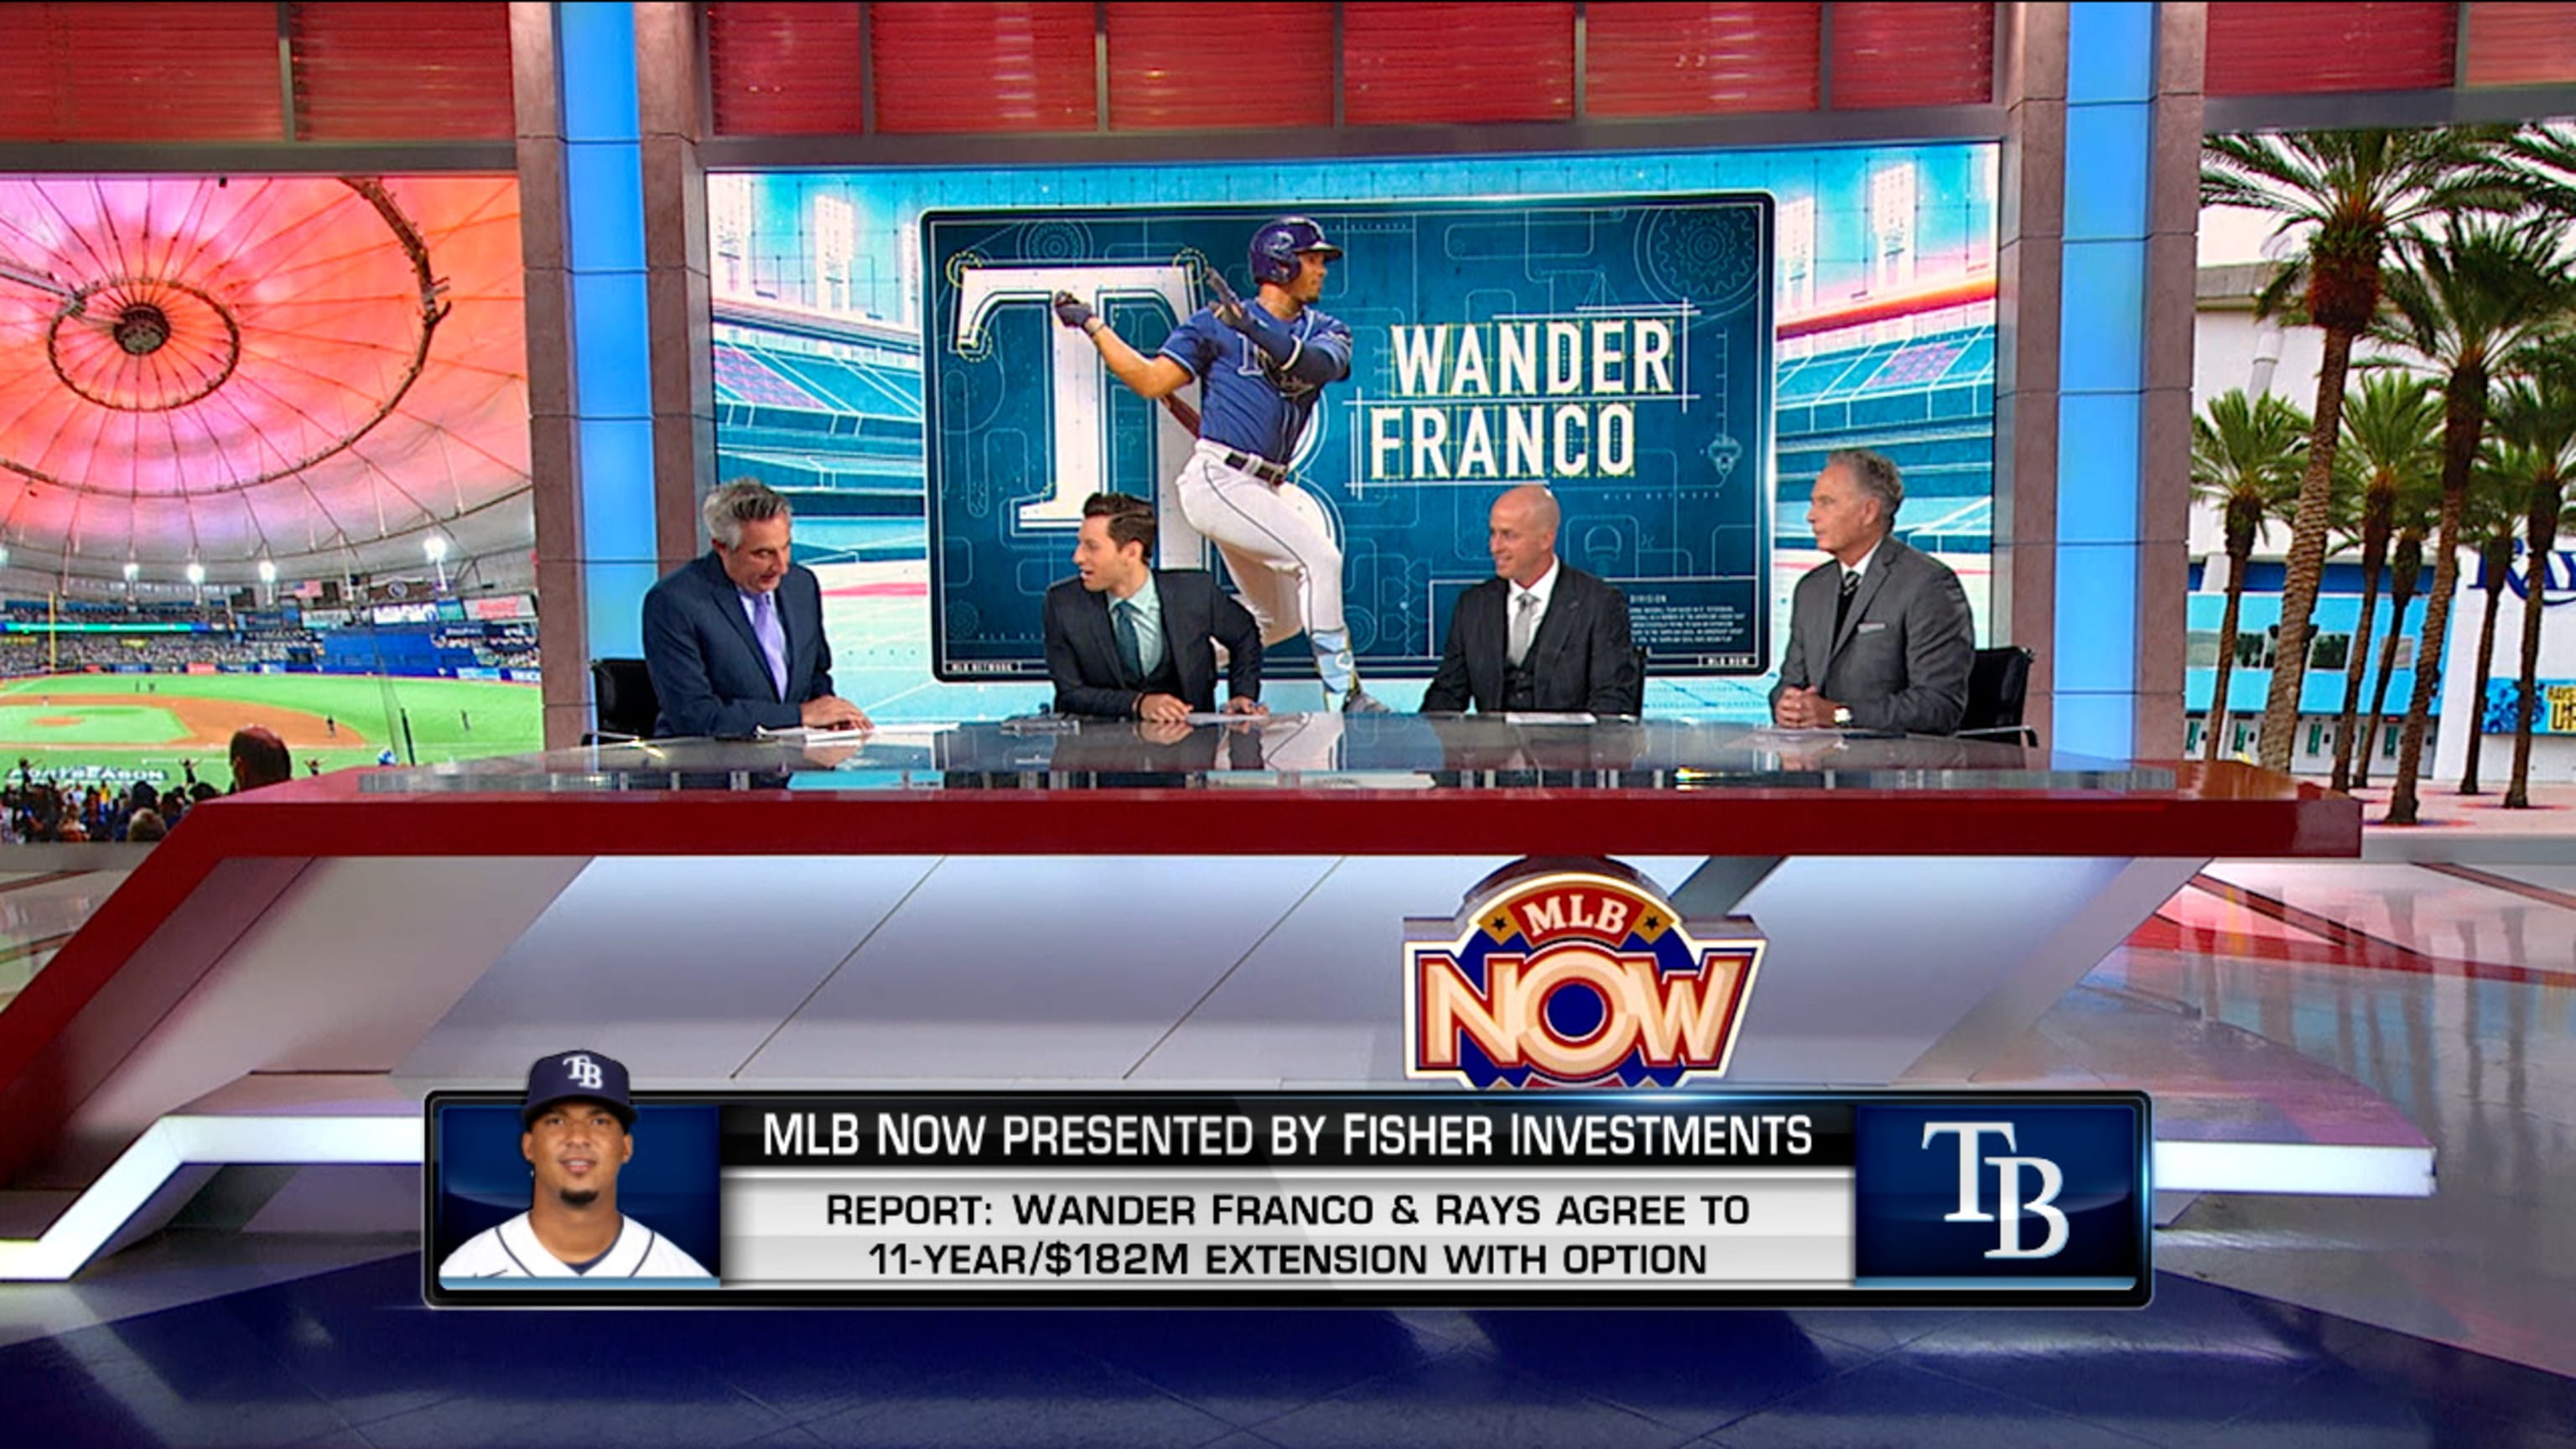 Wander Franco: Wander Franco to play in MLB? What we know about his future  in Major League Baseball - The Economic Times